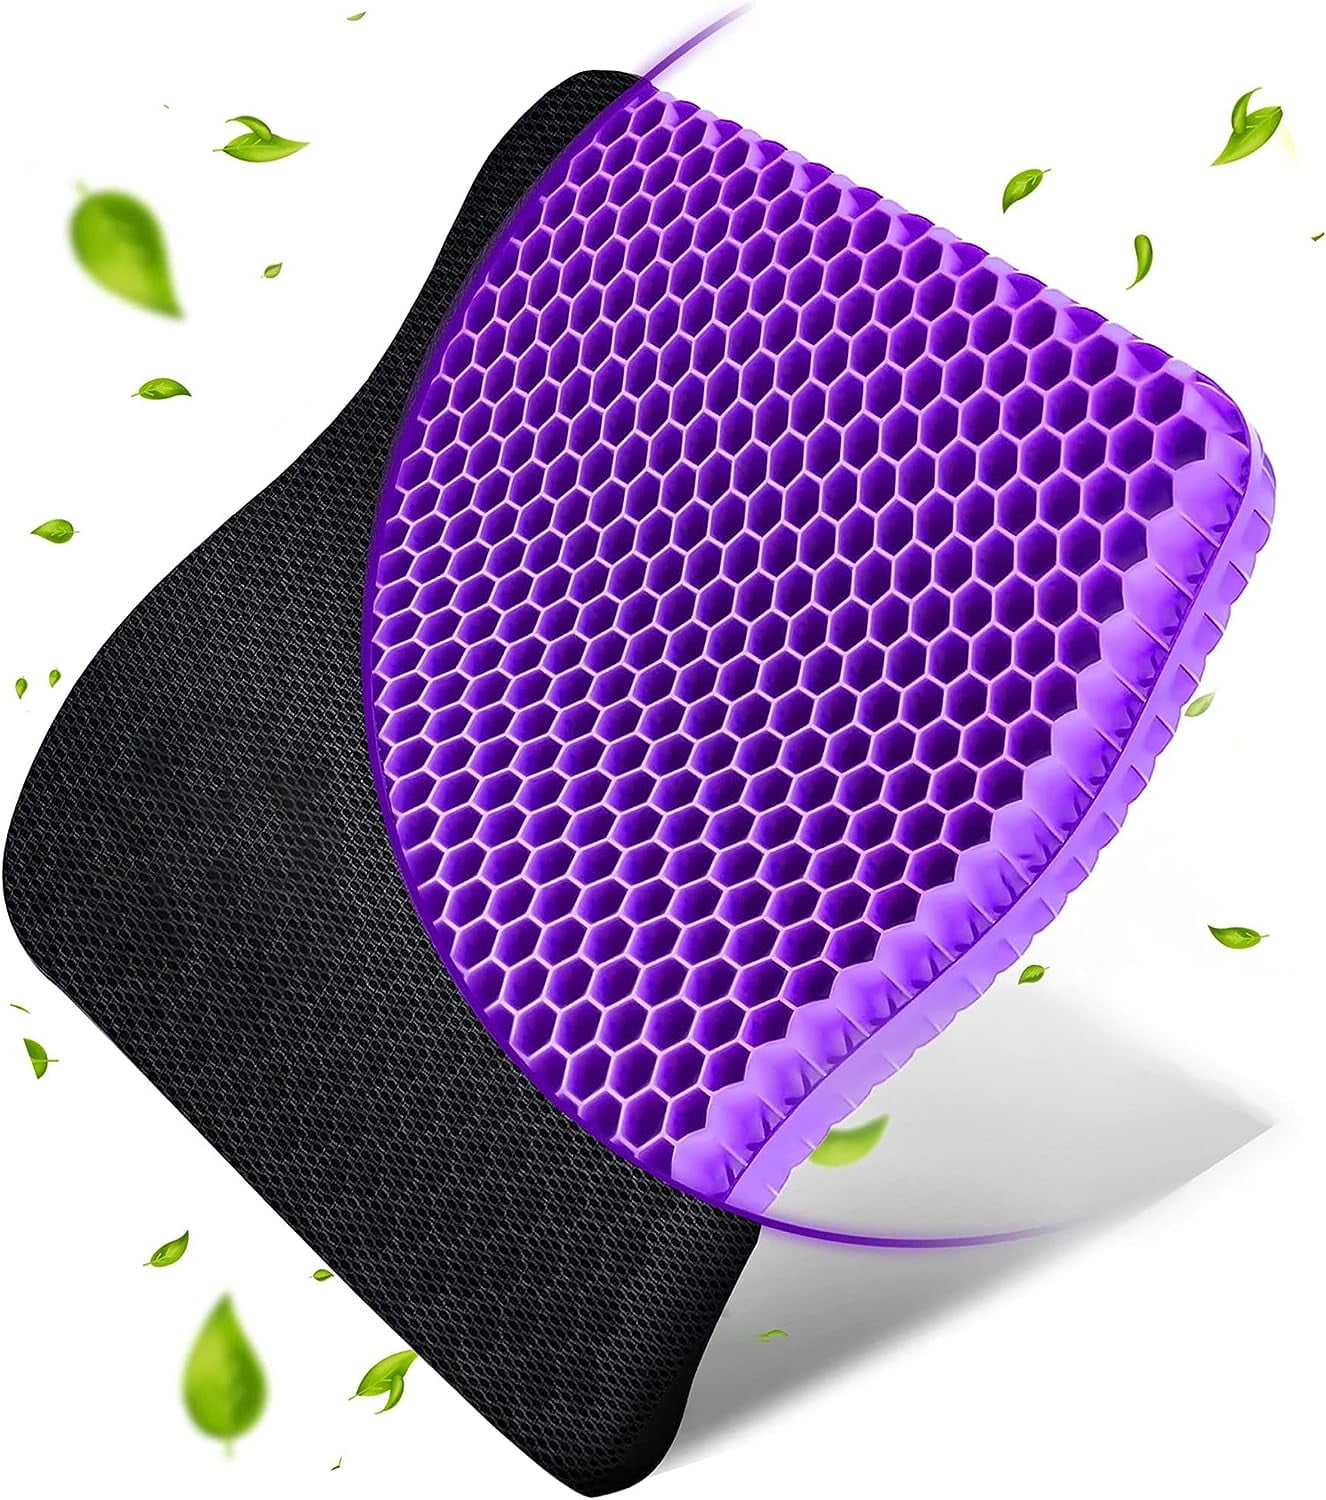 XSIUYU Extra-Large Gel Seat Cushion for Long Sitting - Back, Hip, Tailbone Pain Relief Cushion - Gel Seat Cushion for Office Chair, Cars - Egg Seat